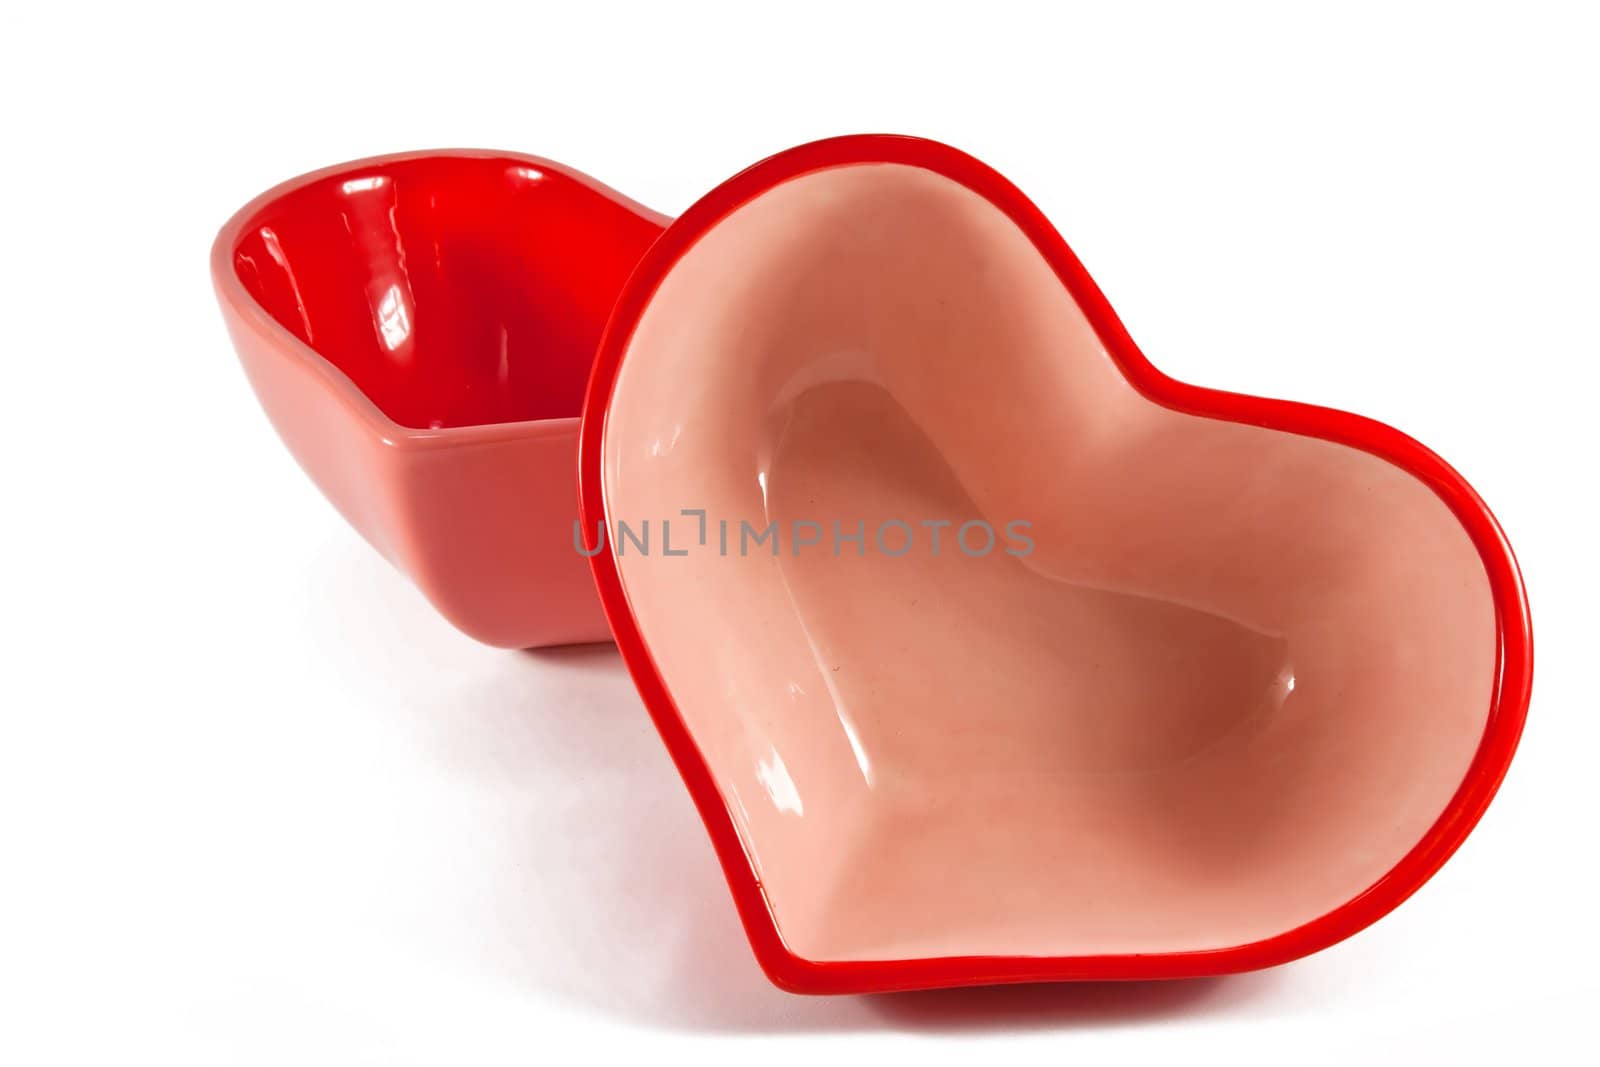 Heart shaped bowls by timscottrom